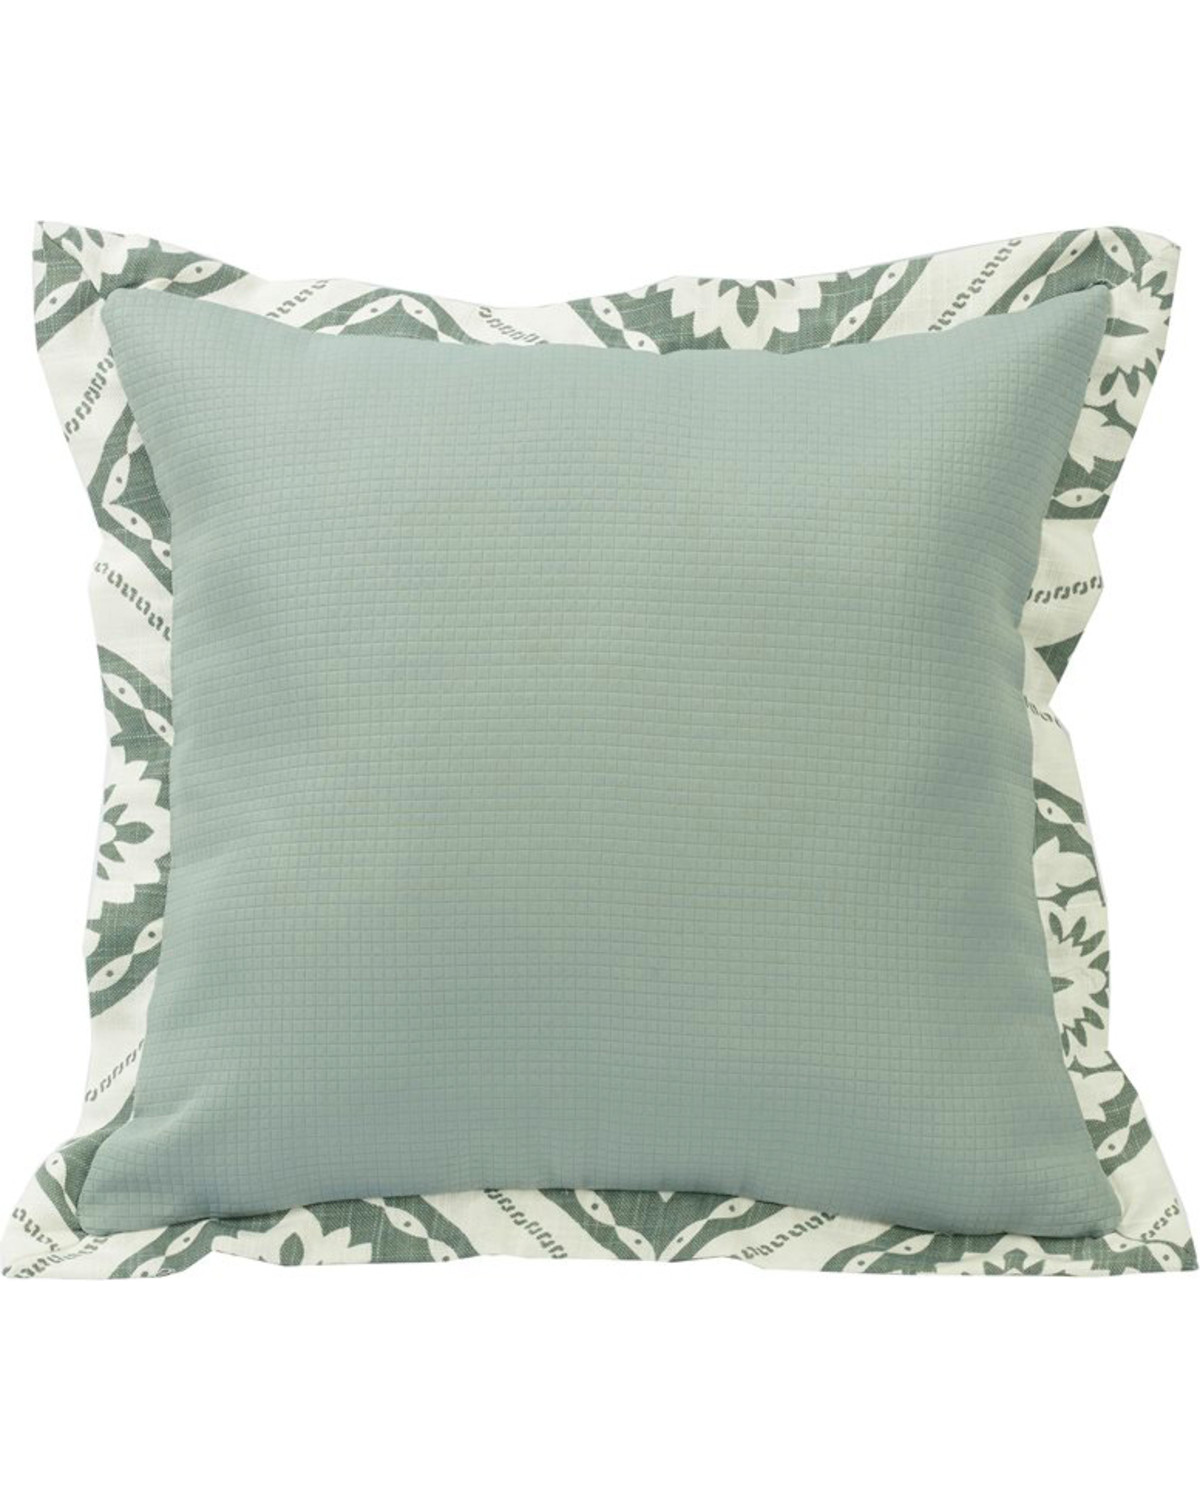 HiEnd Accents Textured Fabric Throw Pillow